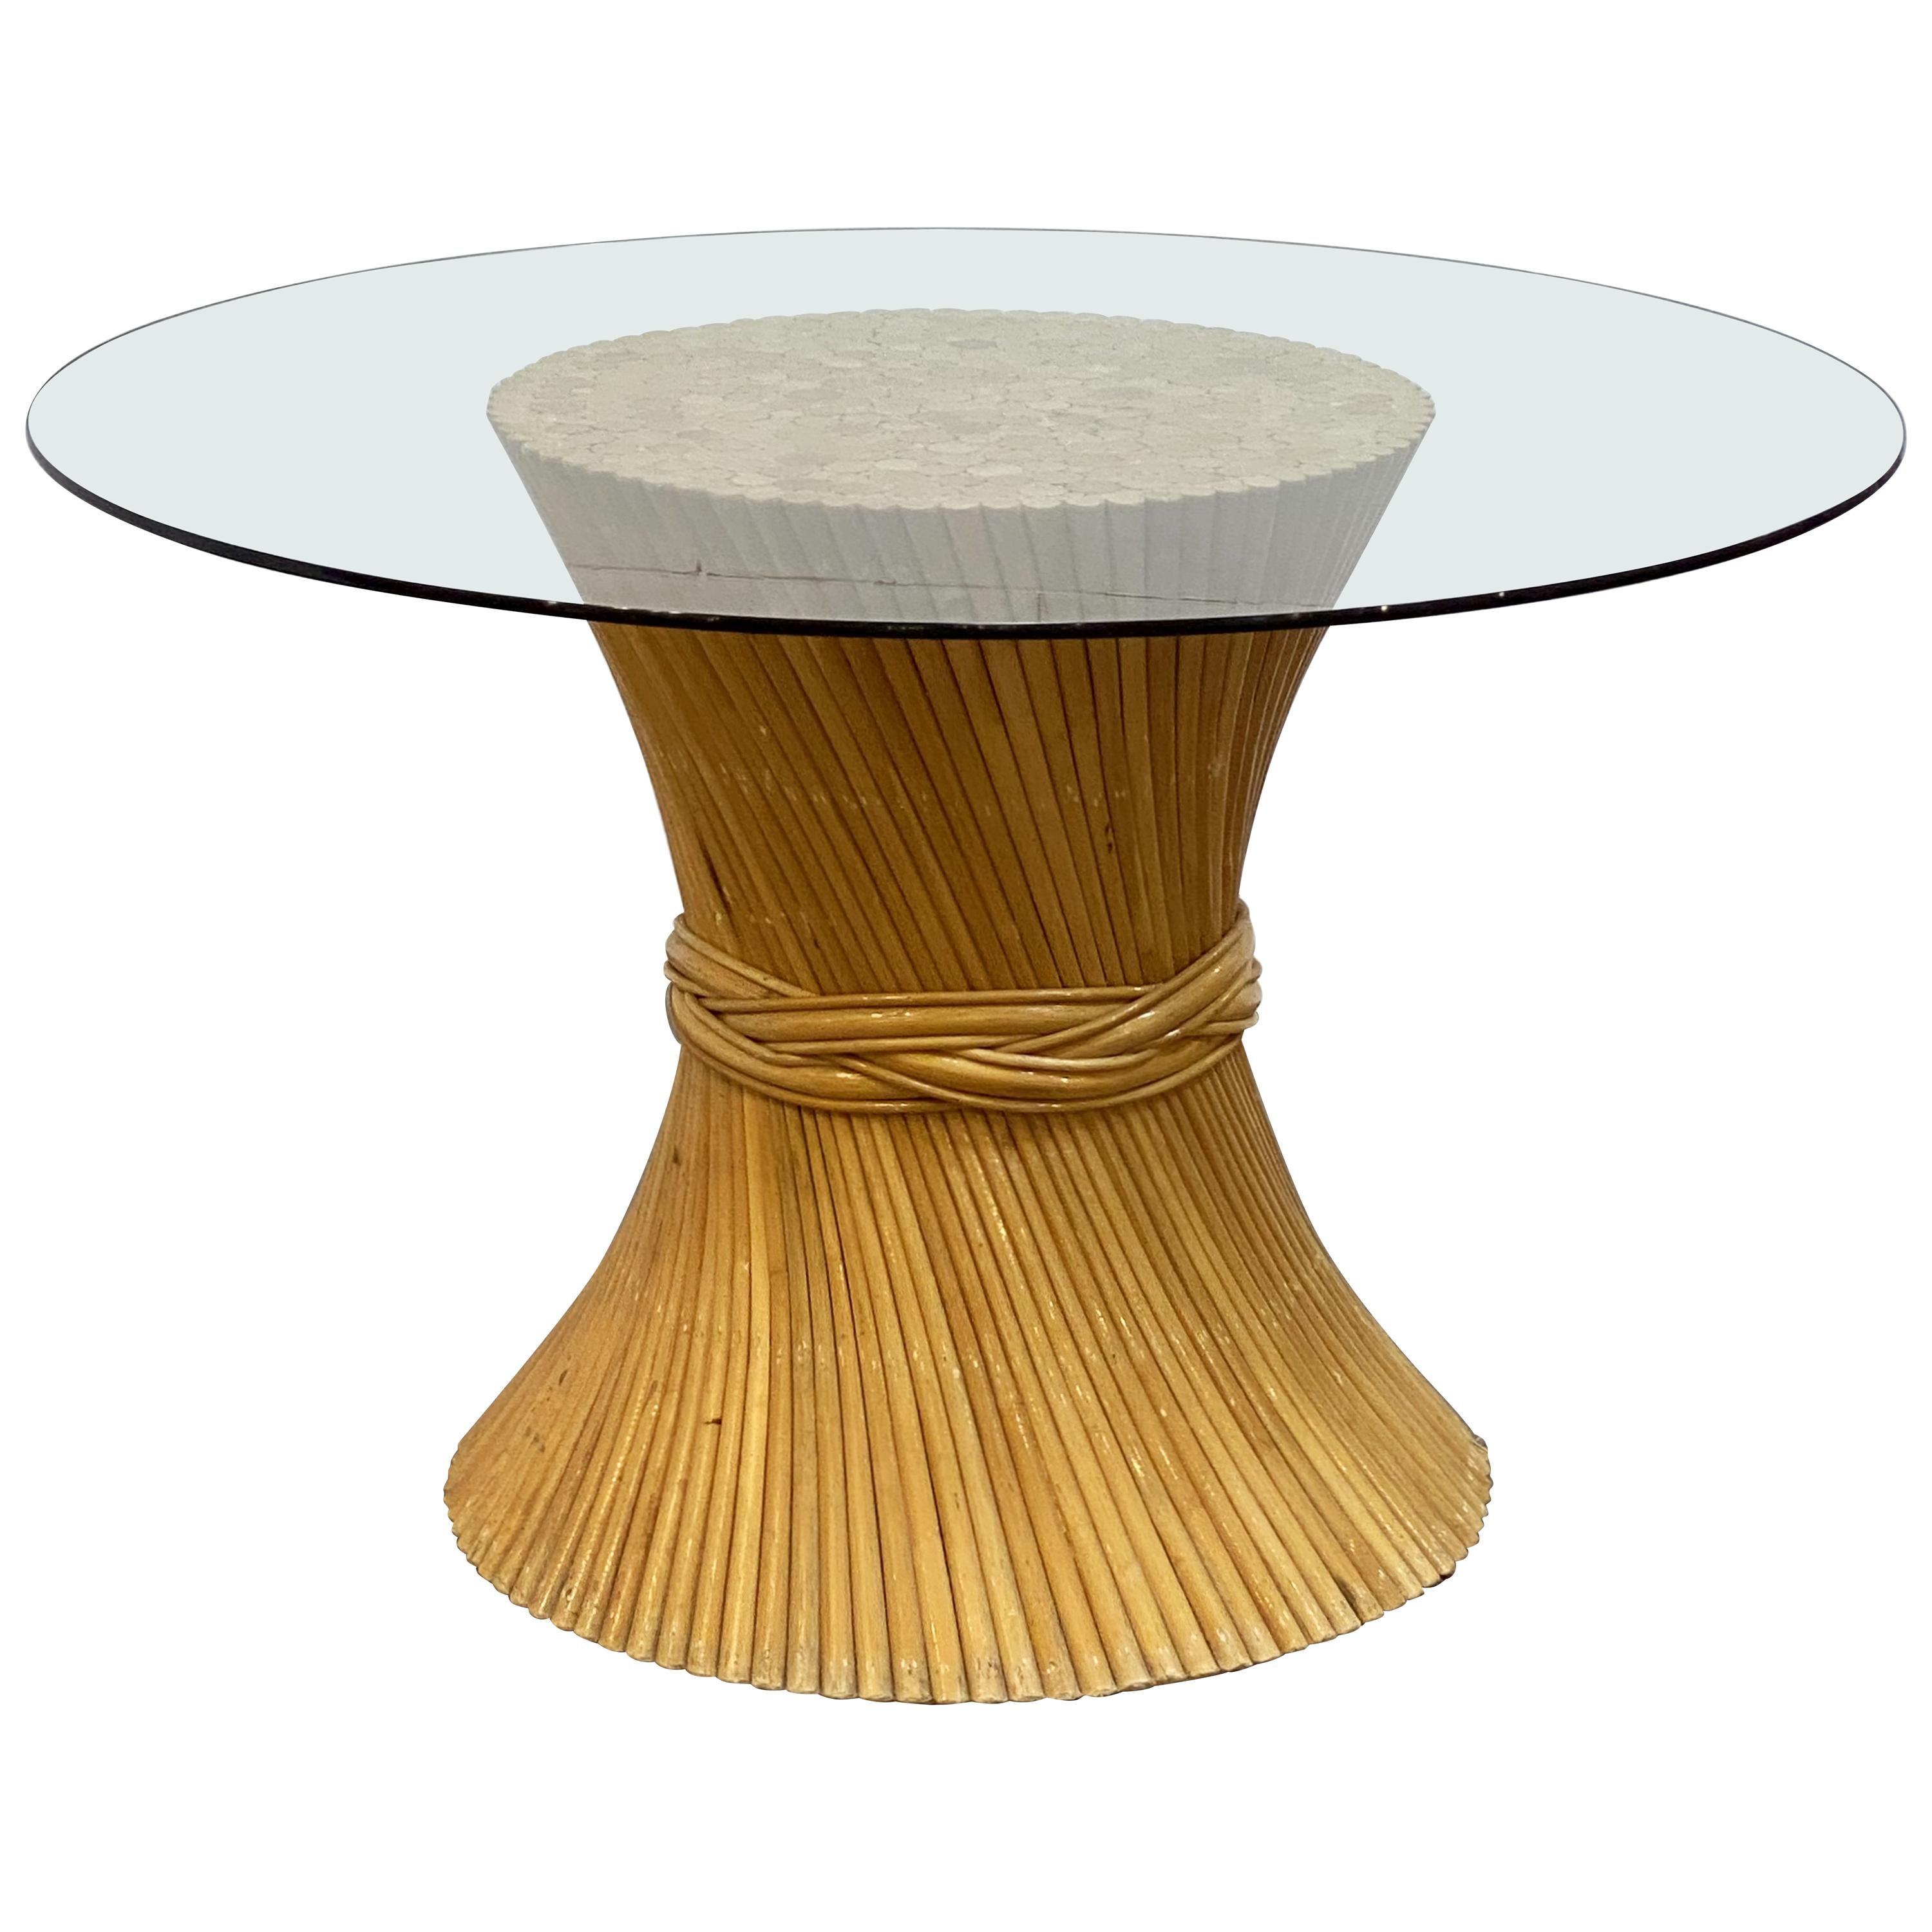 Rattan Round or Center Table with Glass Top - Attributed to McGuire